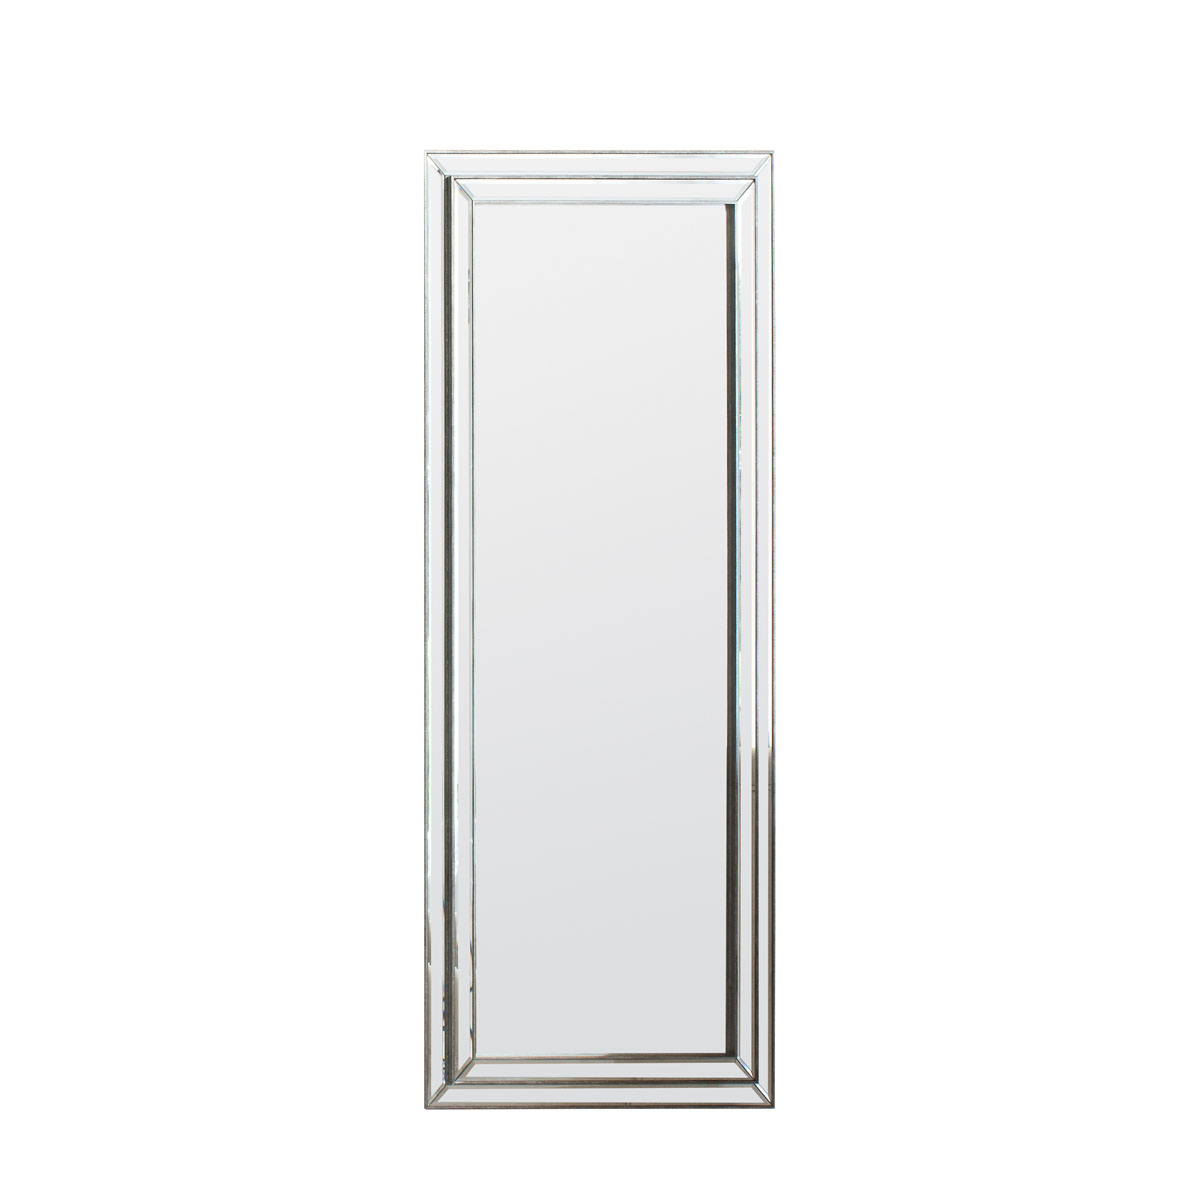 Chambery Leaner Mirror Pewter 1550x685mm